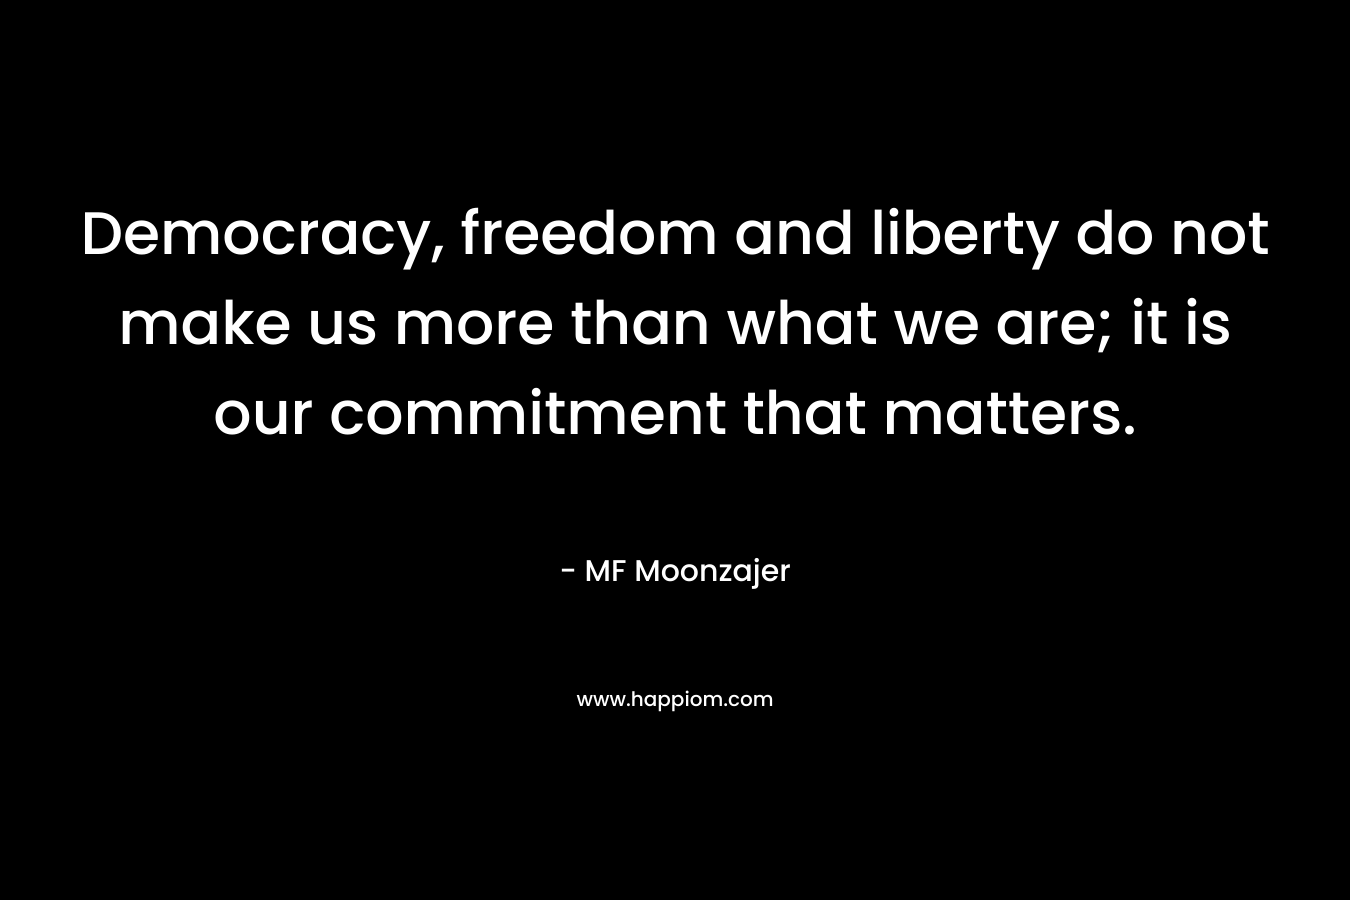 Democracy, freedom and liberty do not make us more than what we are; it is our commitment that matters. – MF Moonzajer